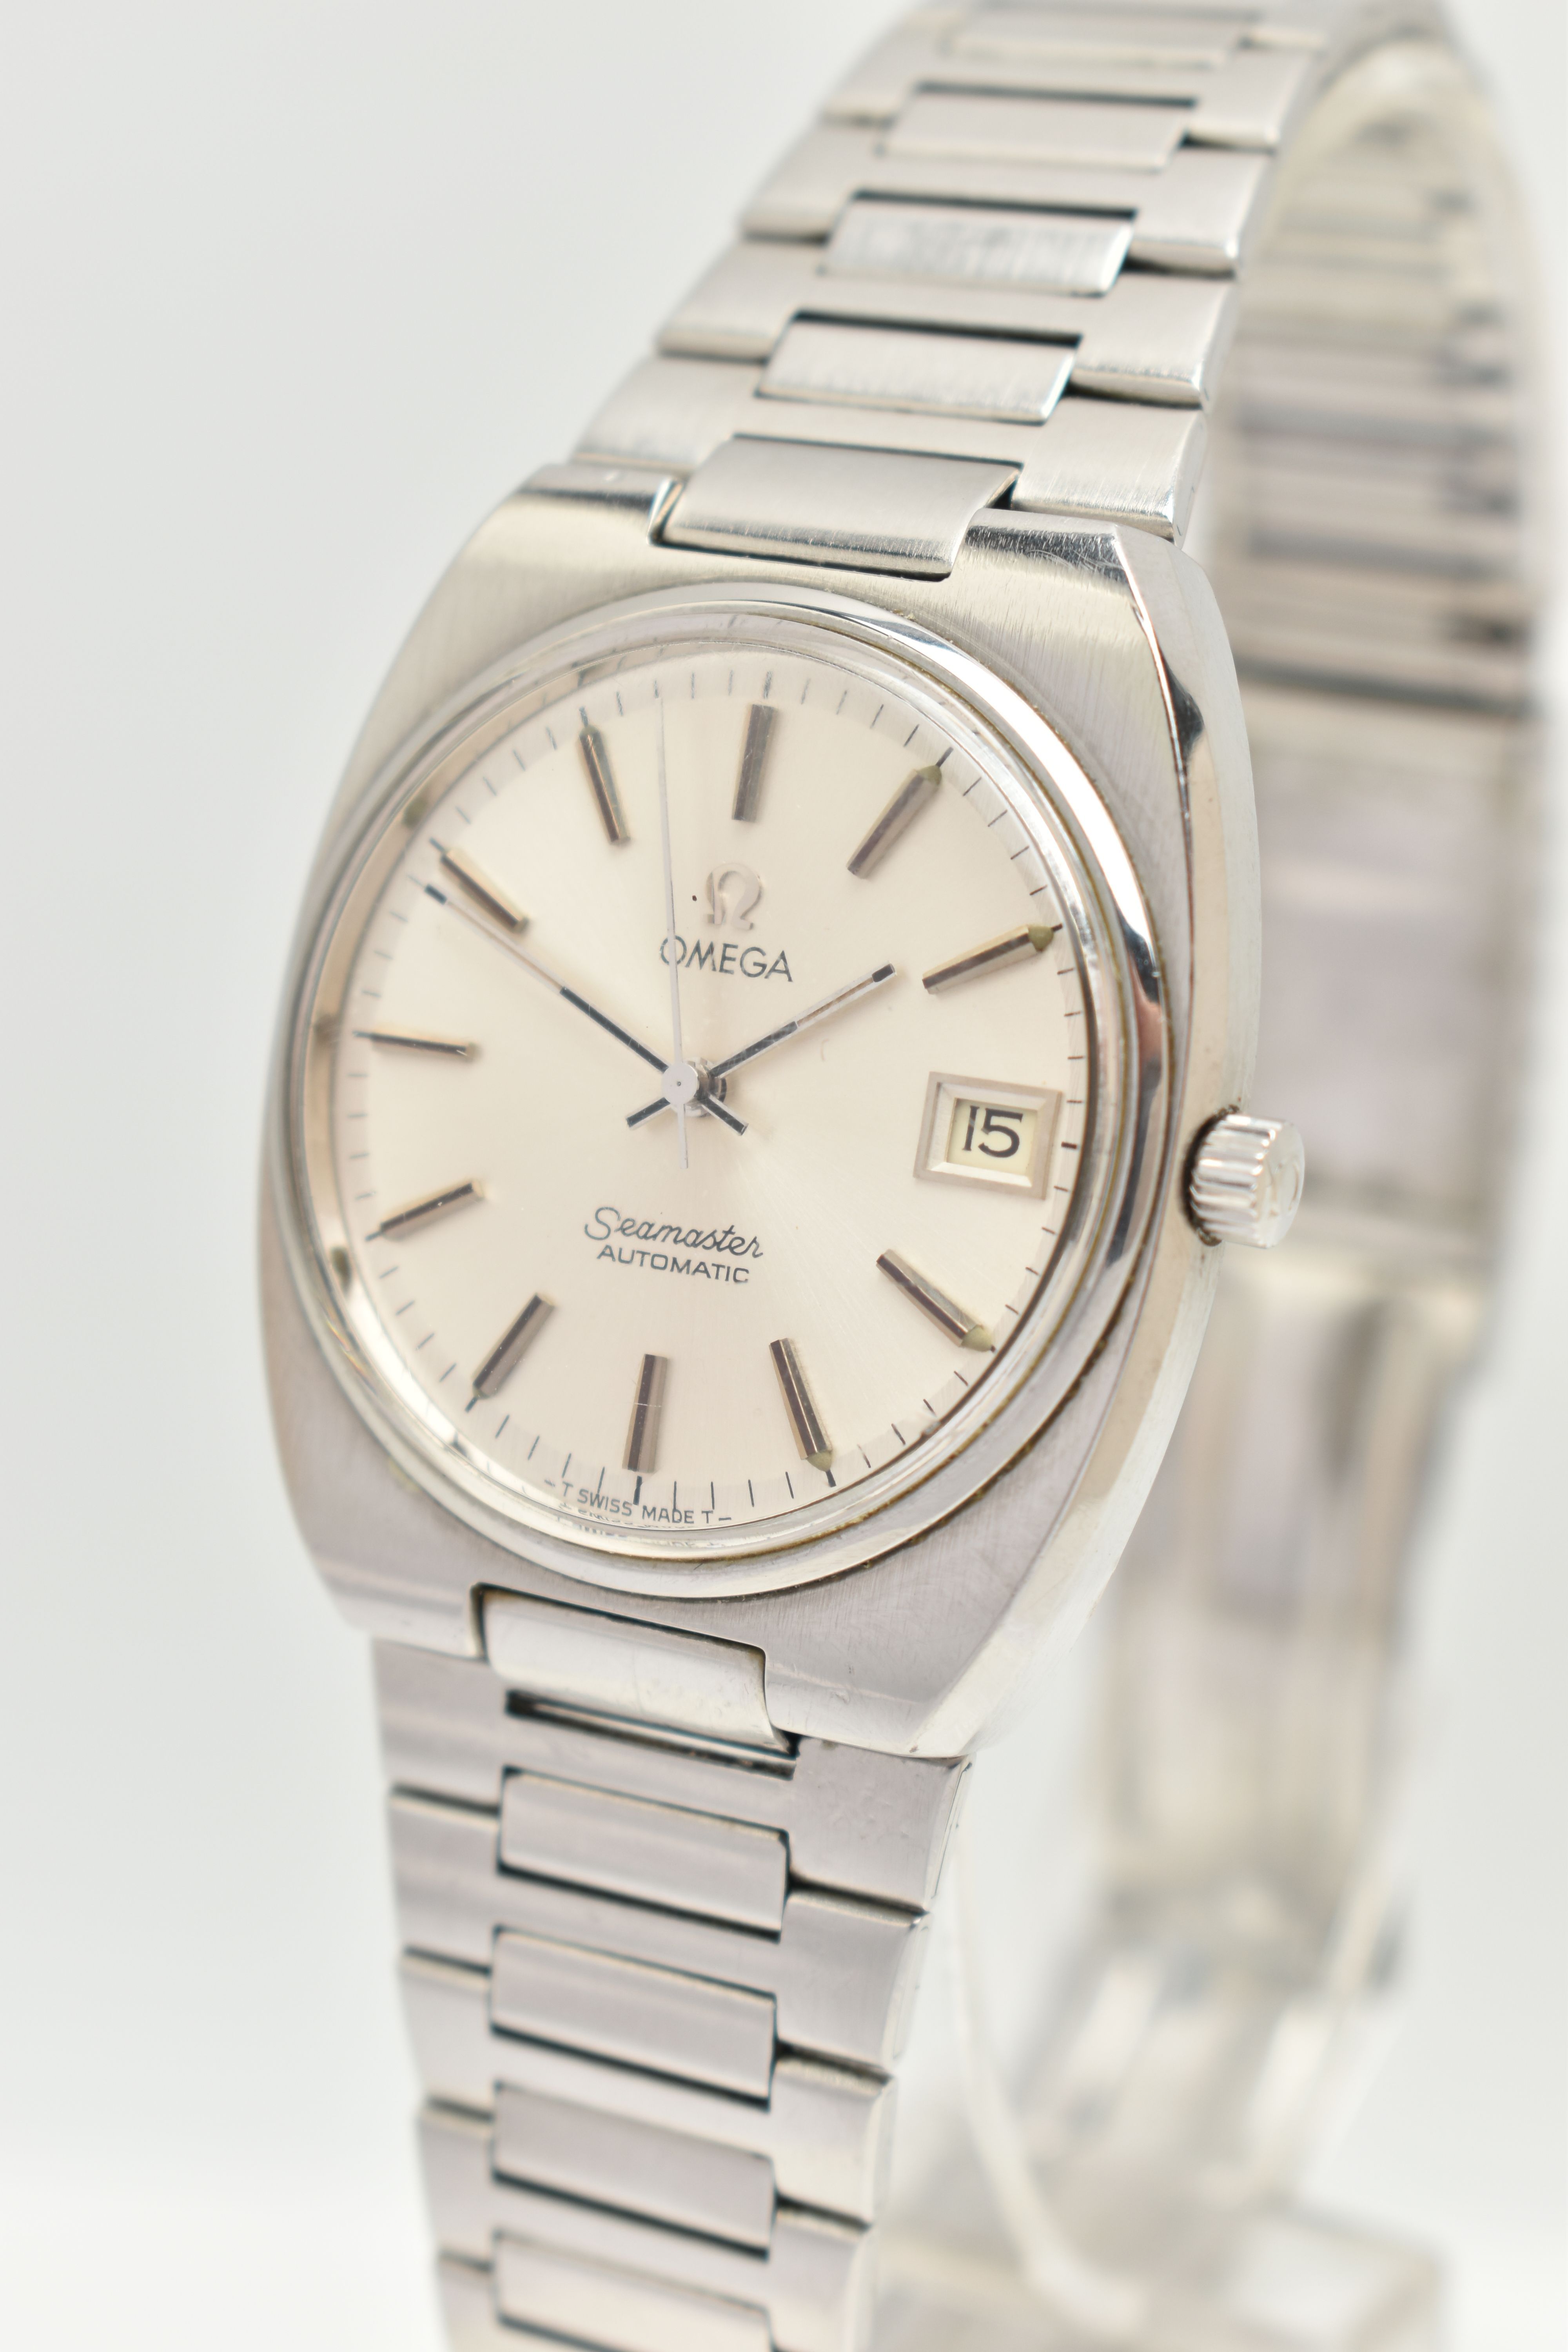 AN 'OMEGA' SEAMASTER WRISTWATCH, automatic movement, round silver tone dial signed 'Omega - Image 3 of 7